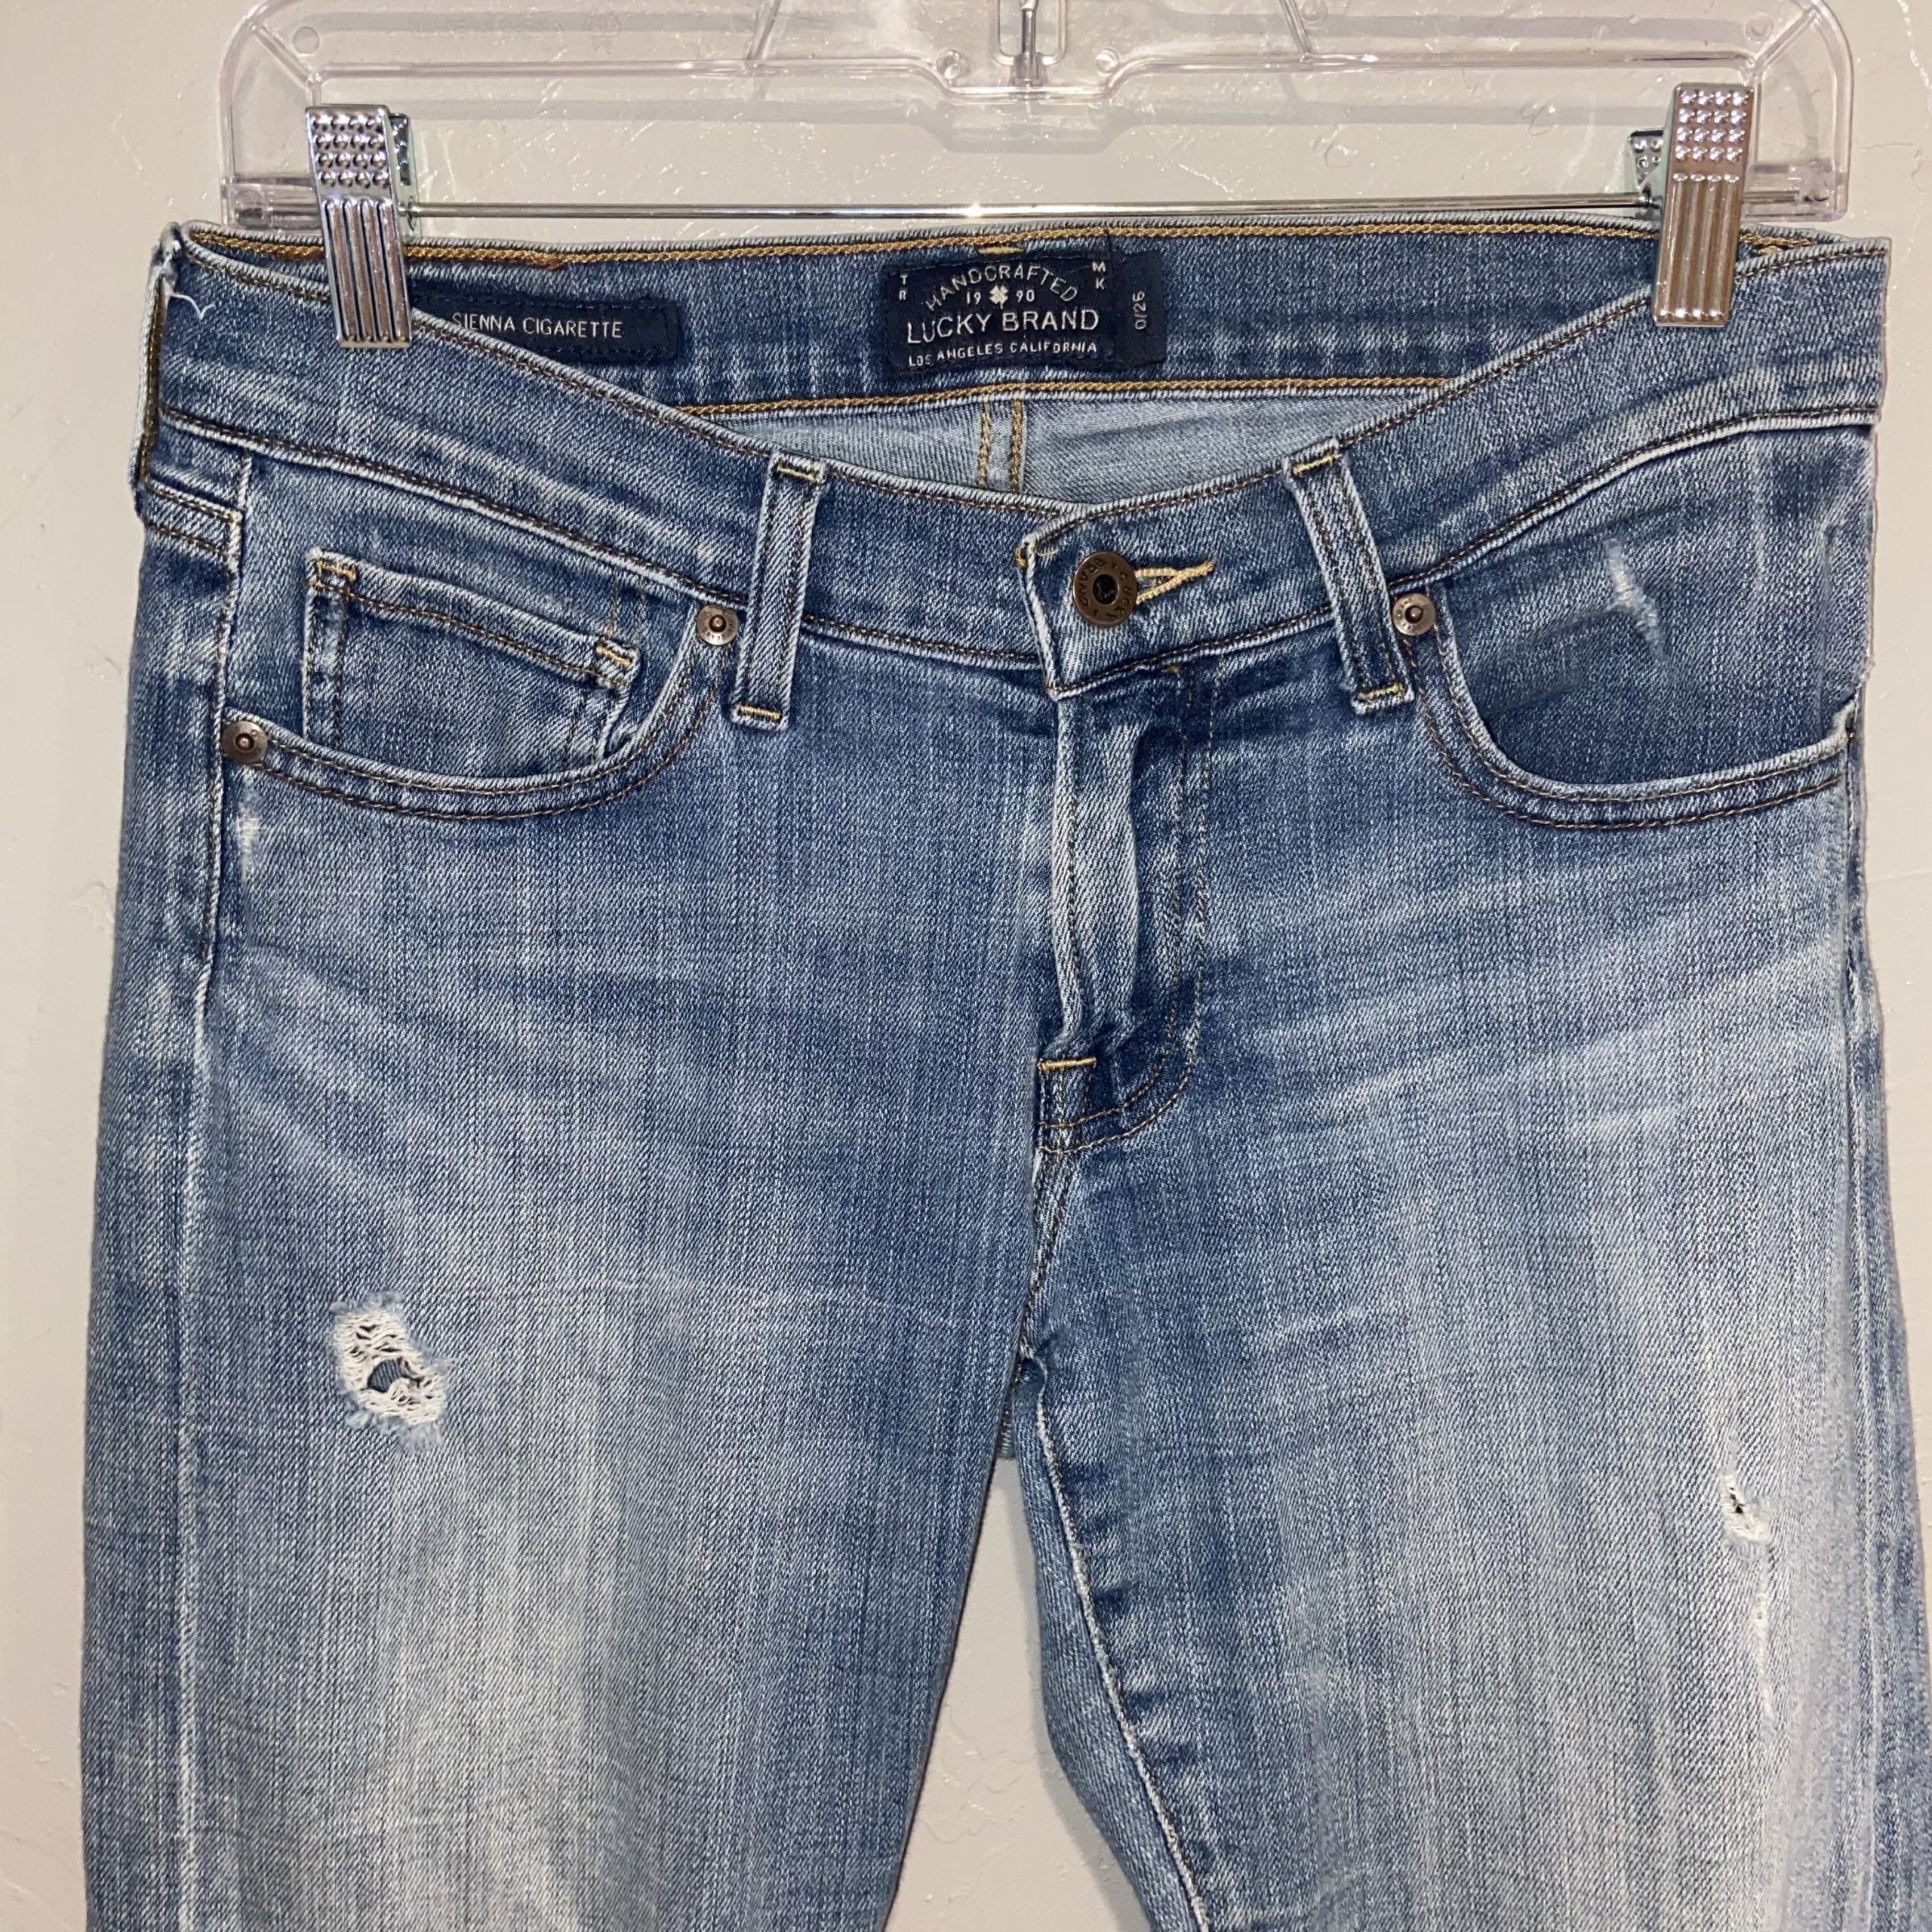 Lucky Brand Jeans – Society of St Vincent de Paul Council of Pittsburgh